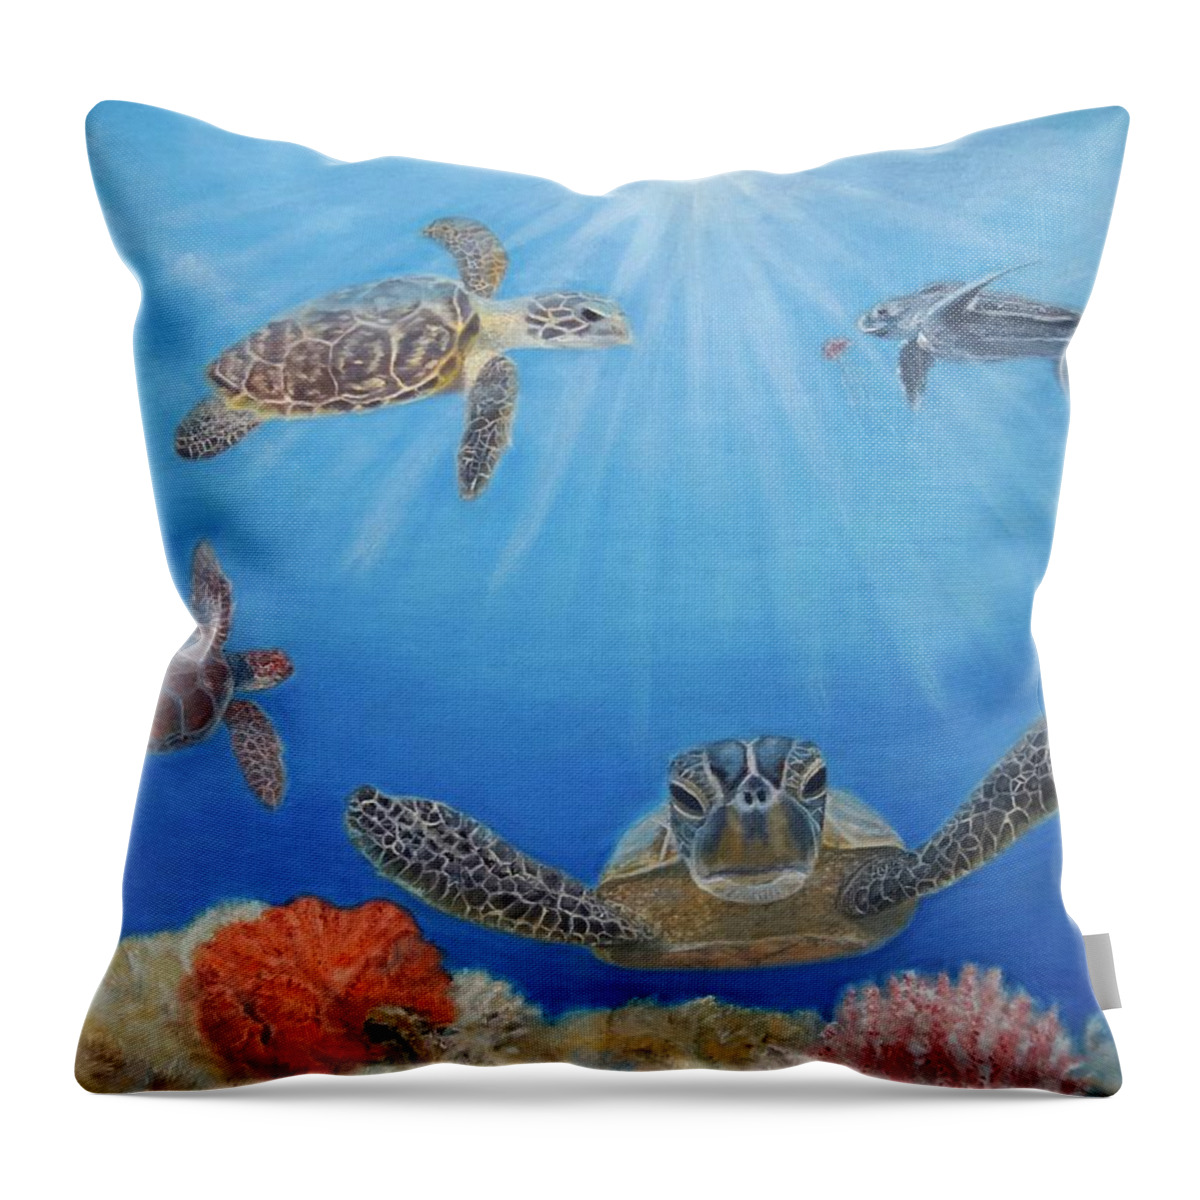 Florida Throw Pillow featuring the painting Florida Sea Turtles by Mike Jenkins